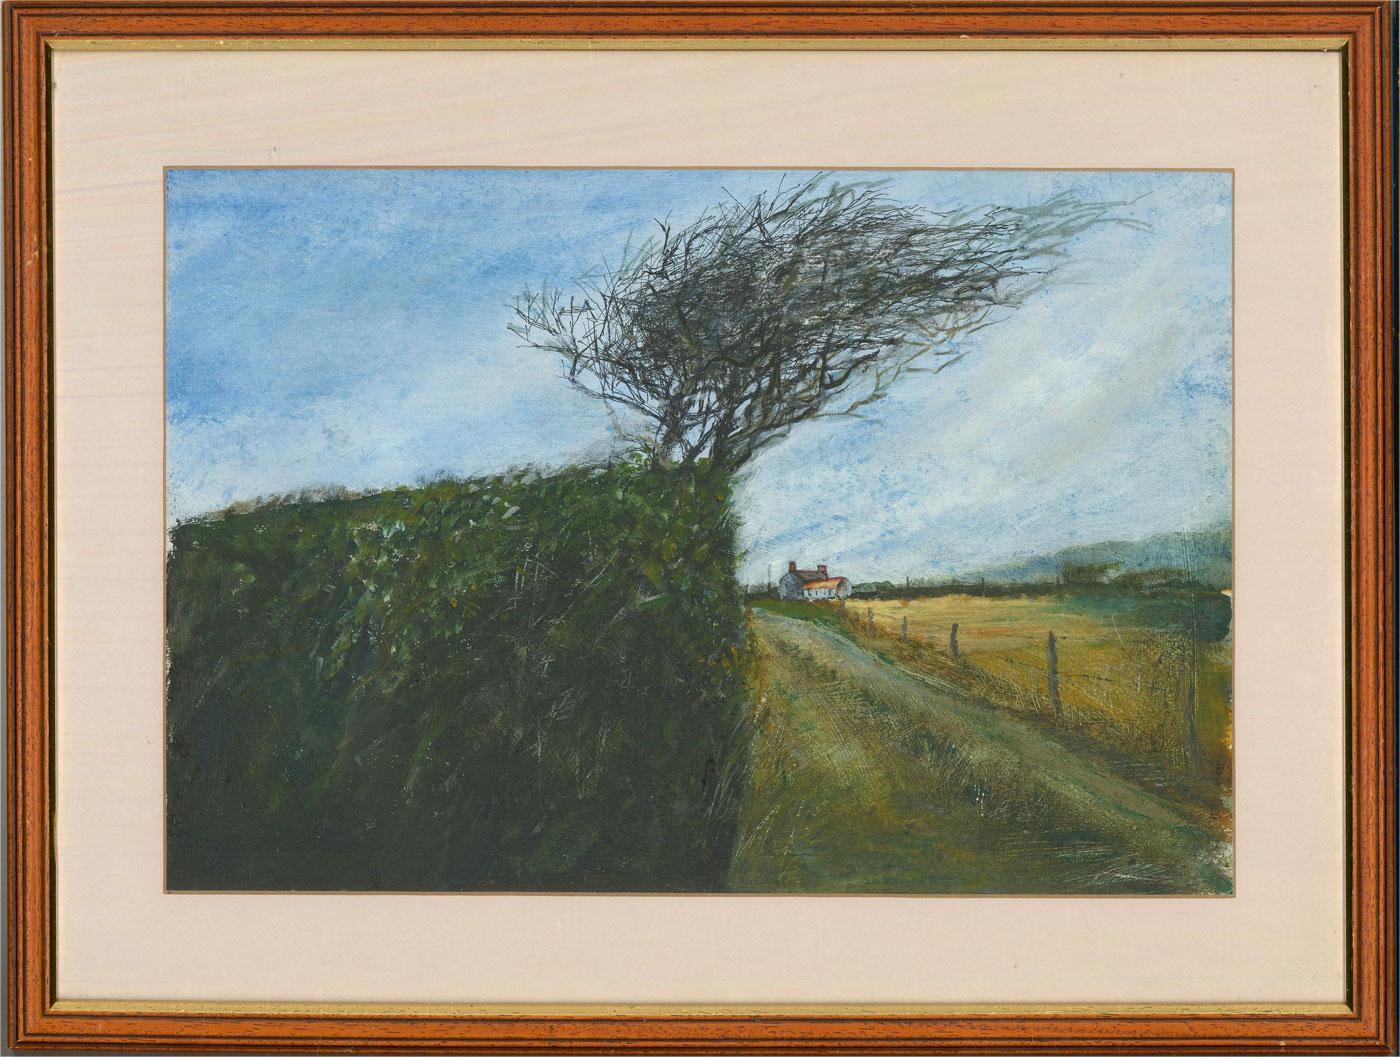 Unknown Landscape Painting - 2004 Acrylic - Hawthorn Hedge and Cottage